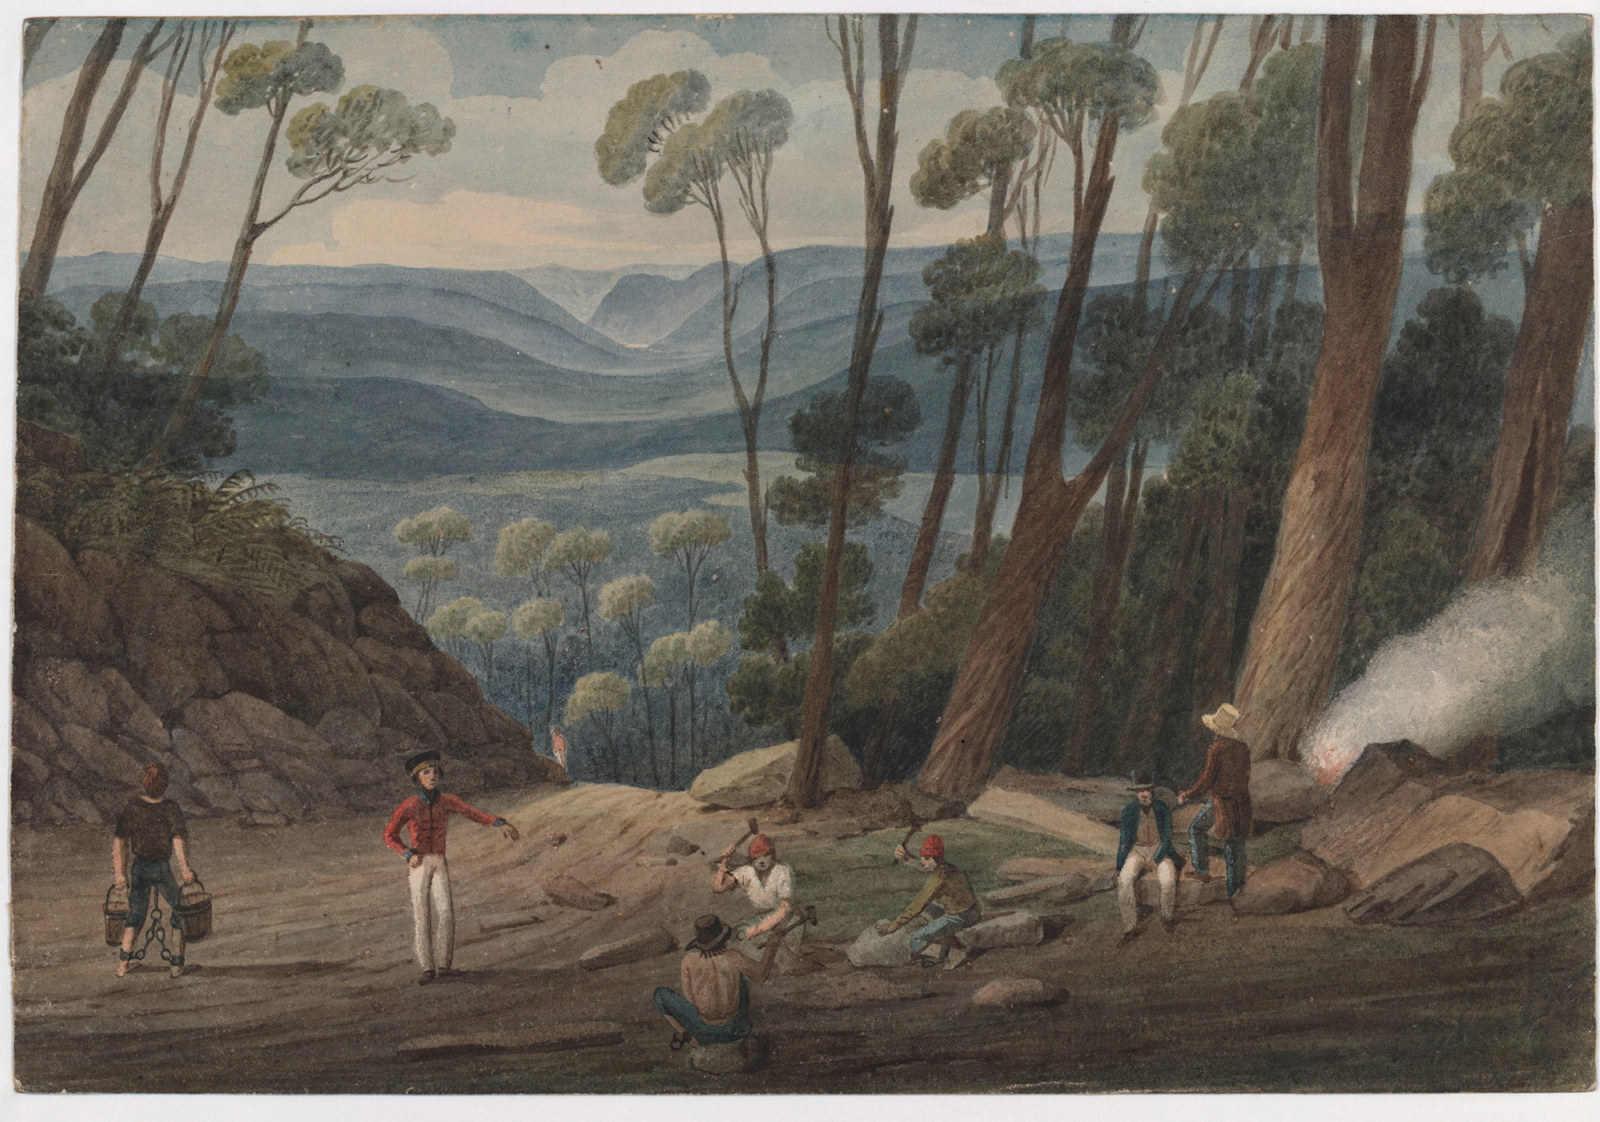 Dark toned painting of men working in foreground with view of mountains and valleys in distance.